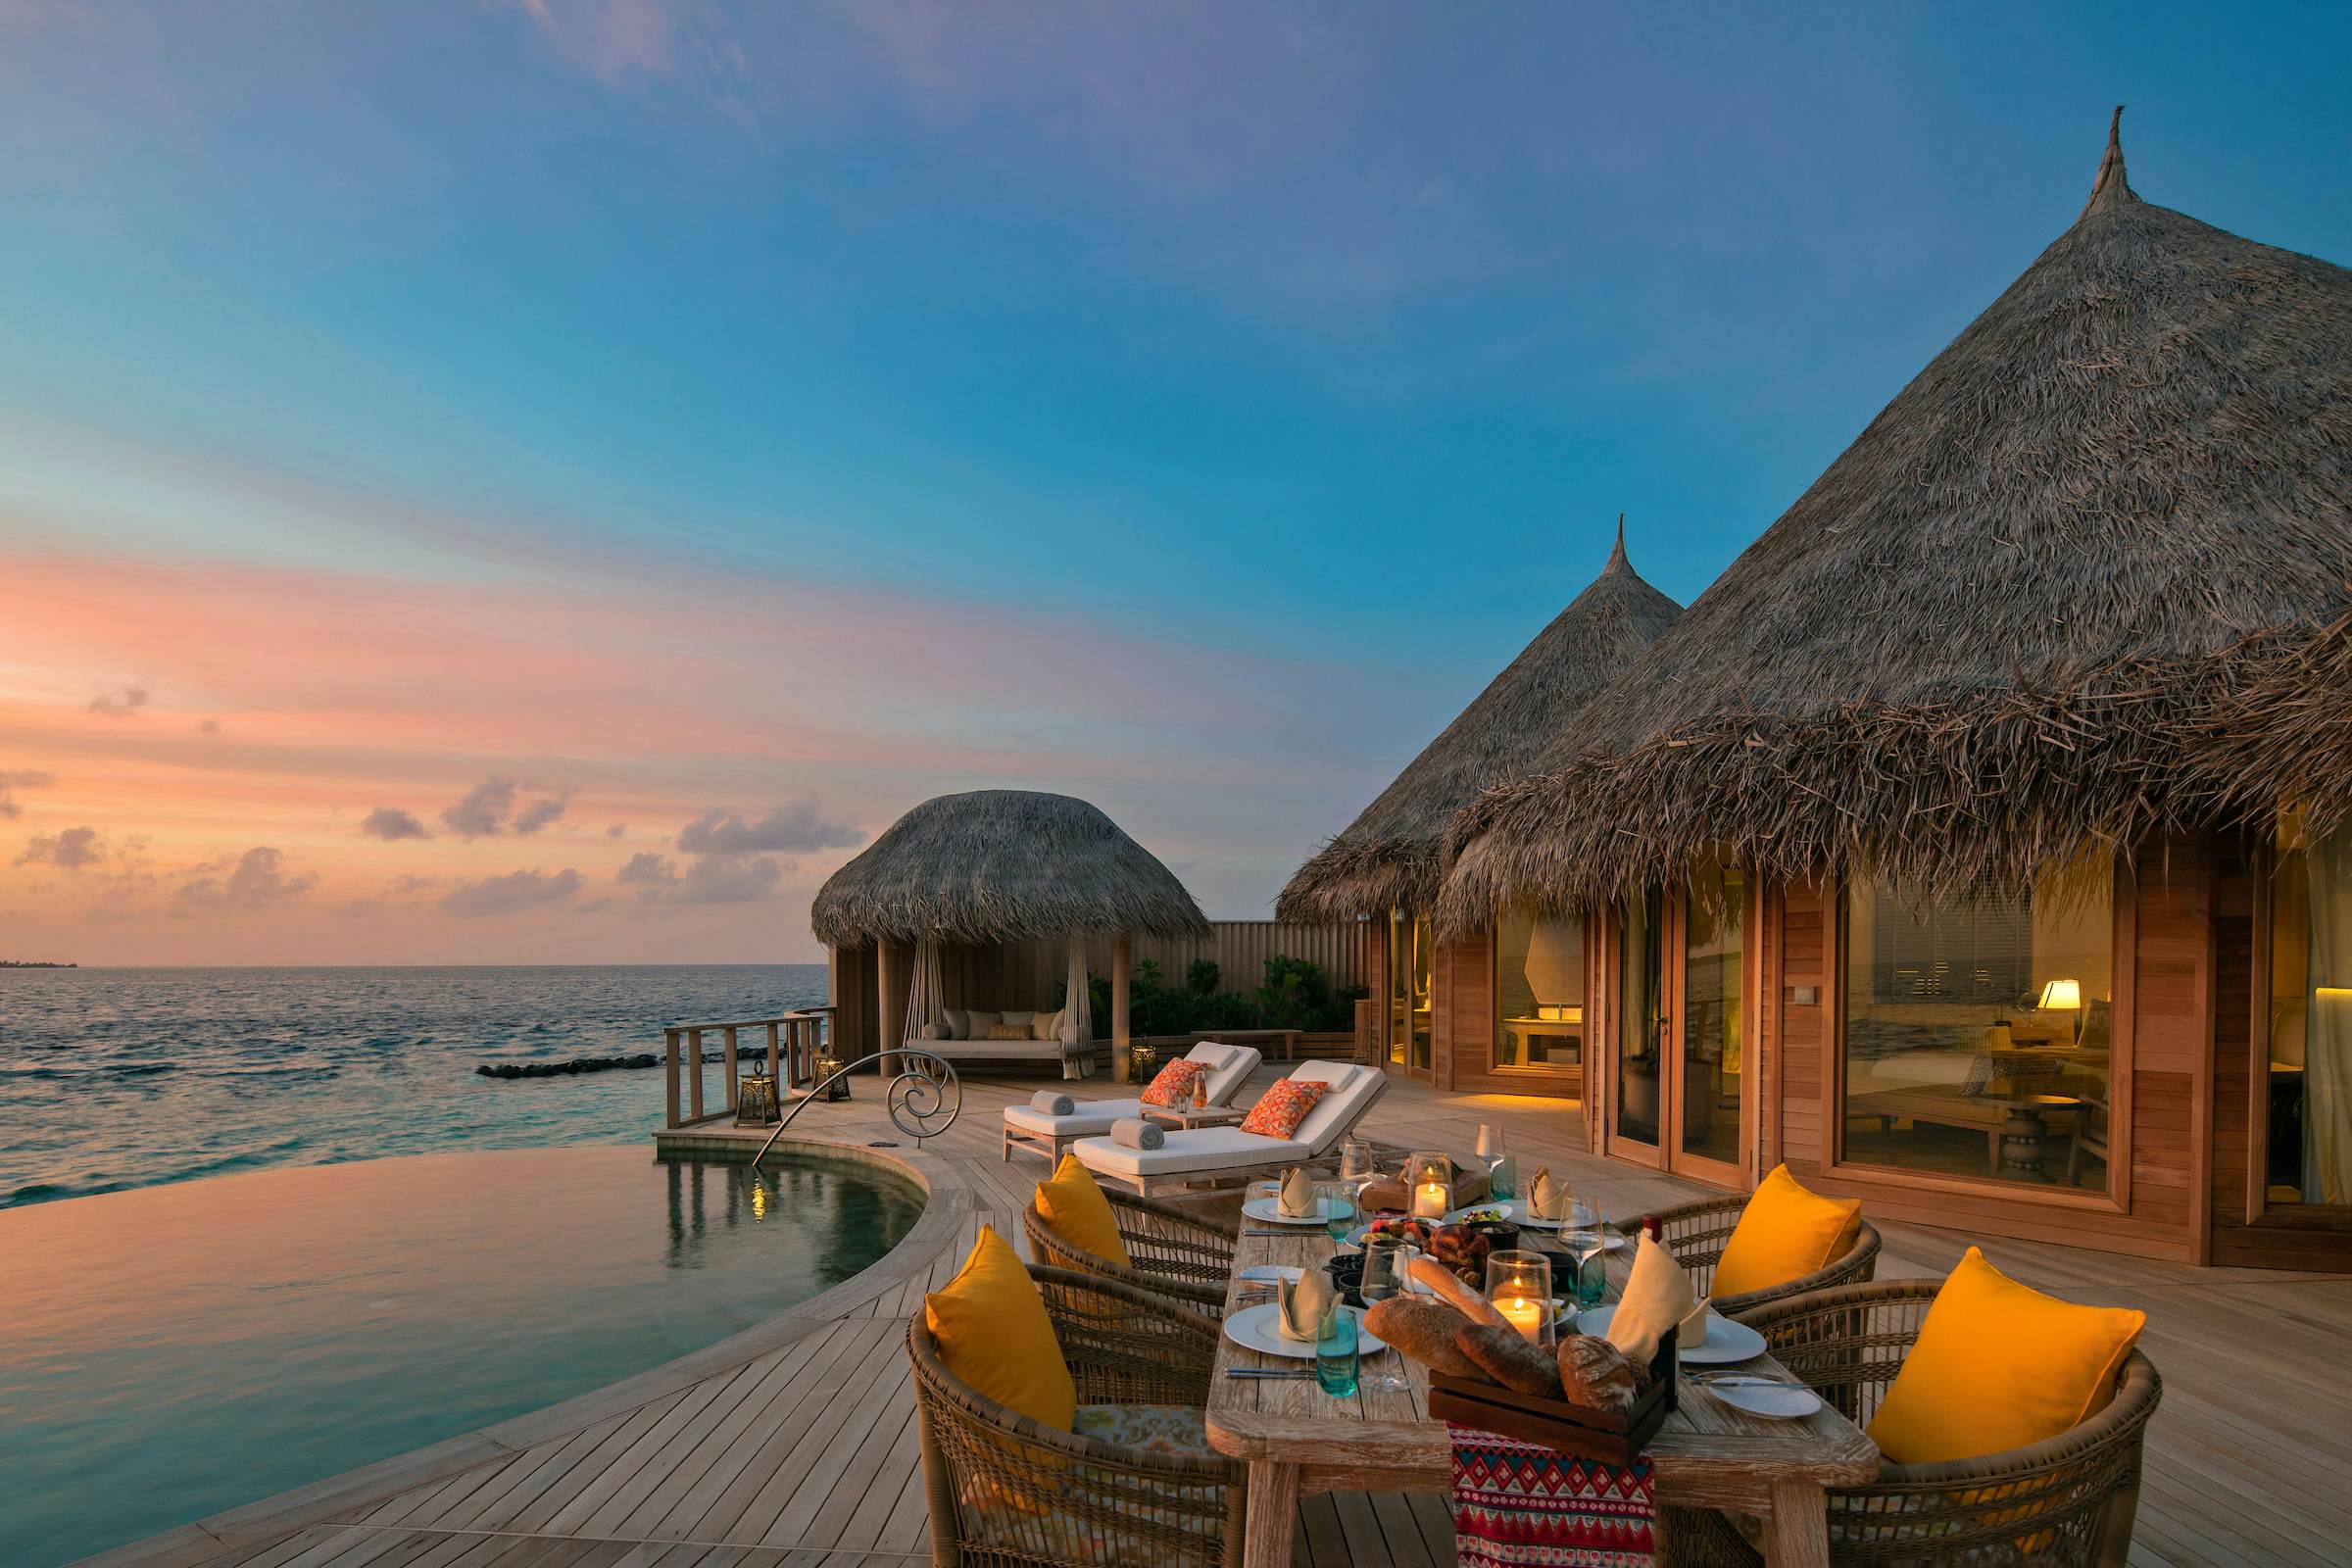 Maldives travel - Lonely Planet | Asia